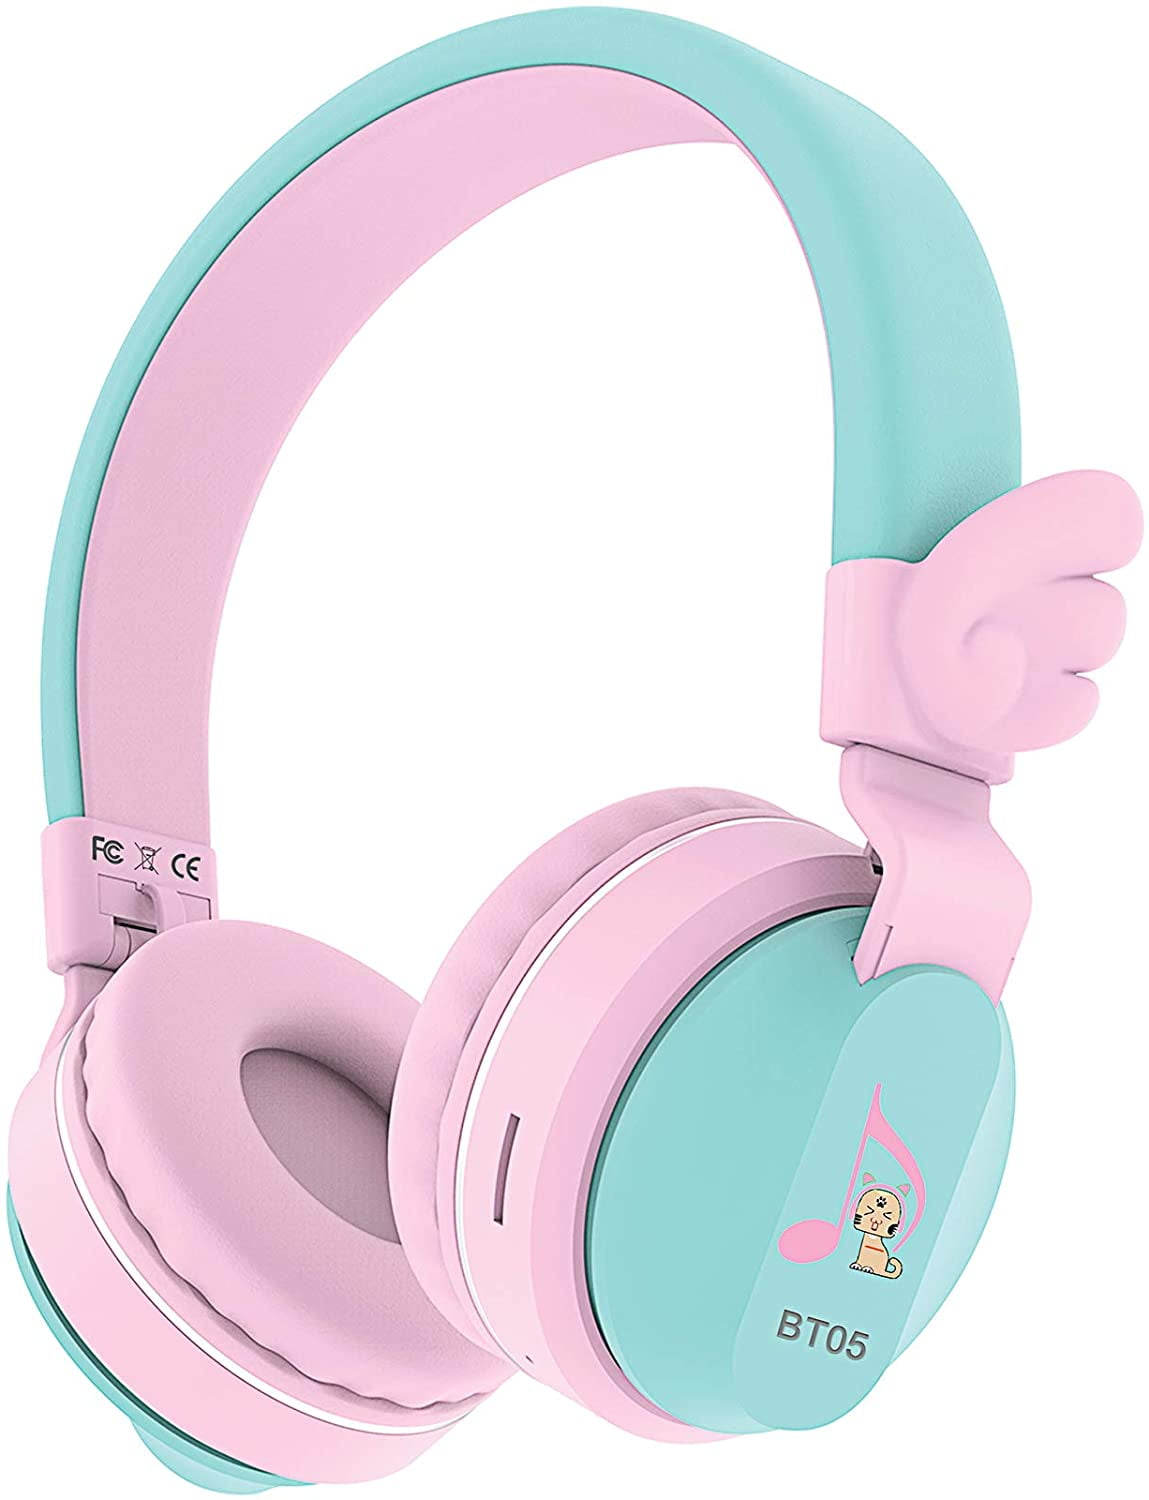 Green SD Card Slot Over-Ear and Build-in Mic Wireless/Wired Headphones for Boys Girls Stereo Sound Kids Headphones Bluetooth Wireless 85db Volume Limited Childrens Headset up to 6-8 Hours Play